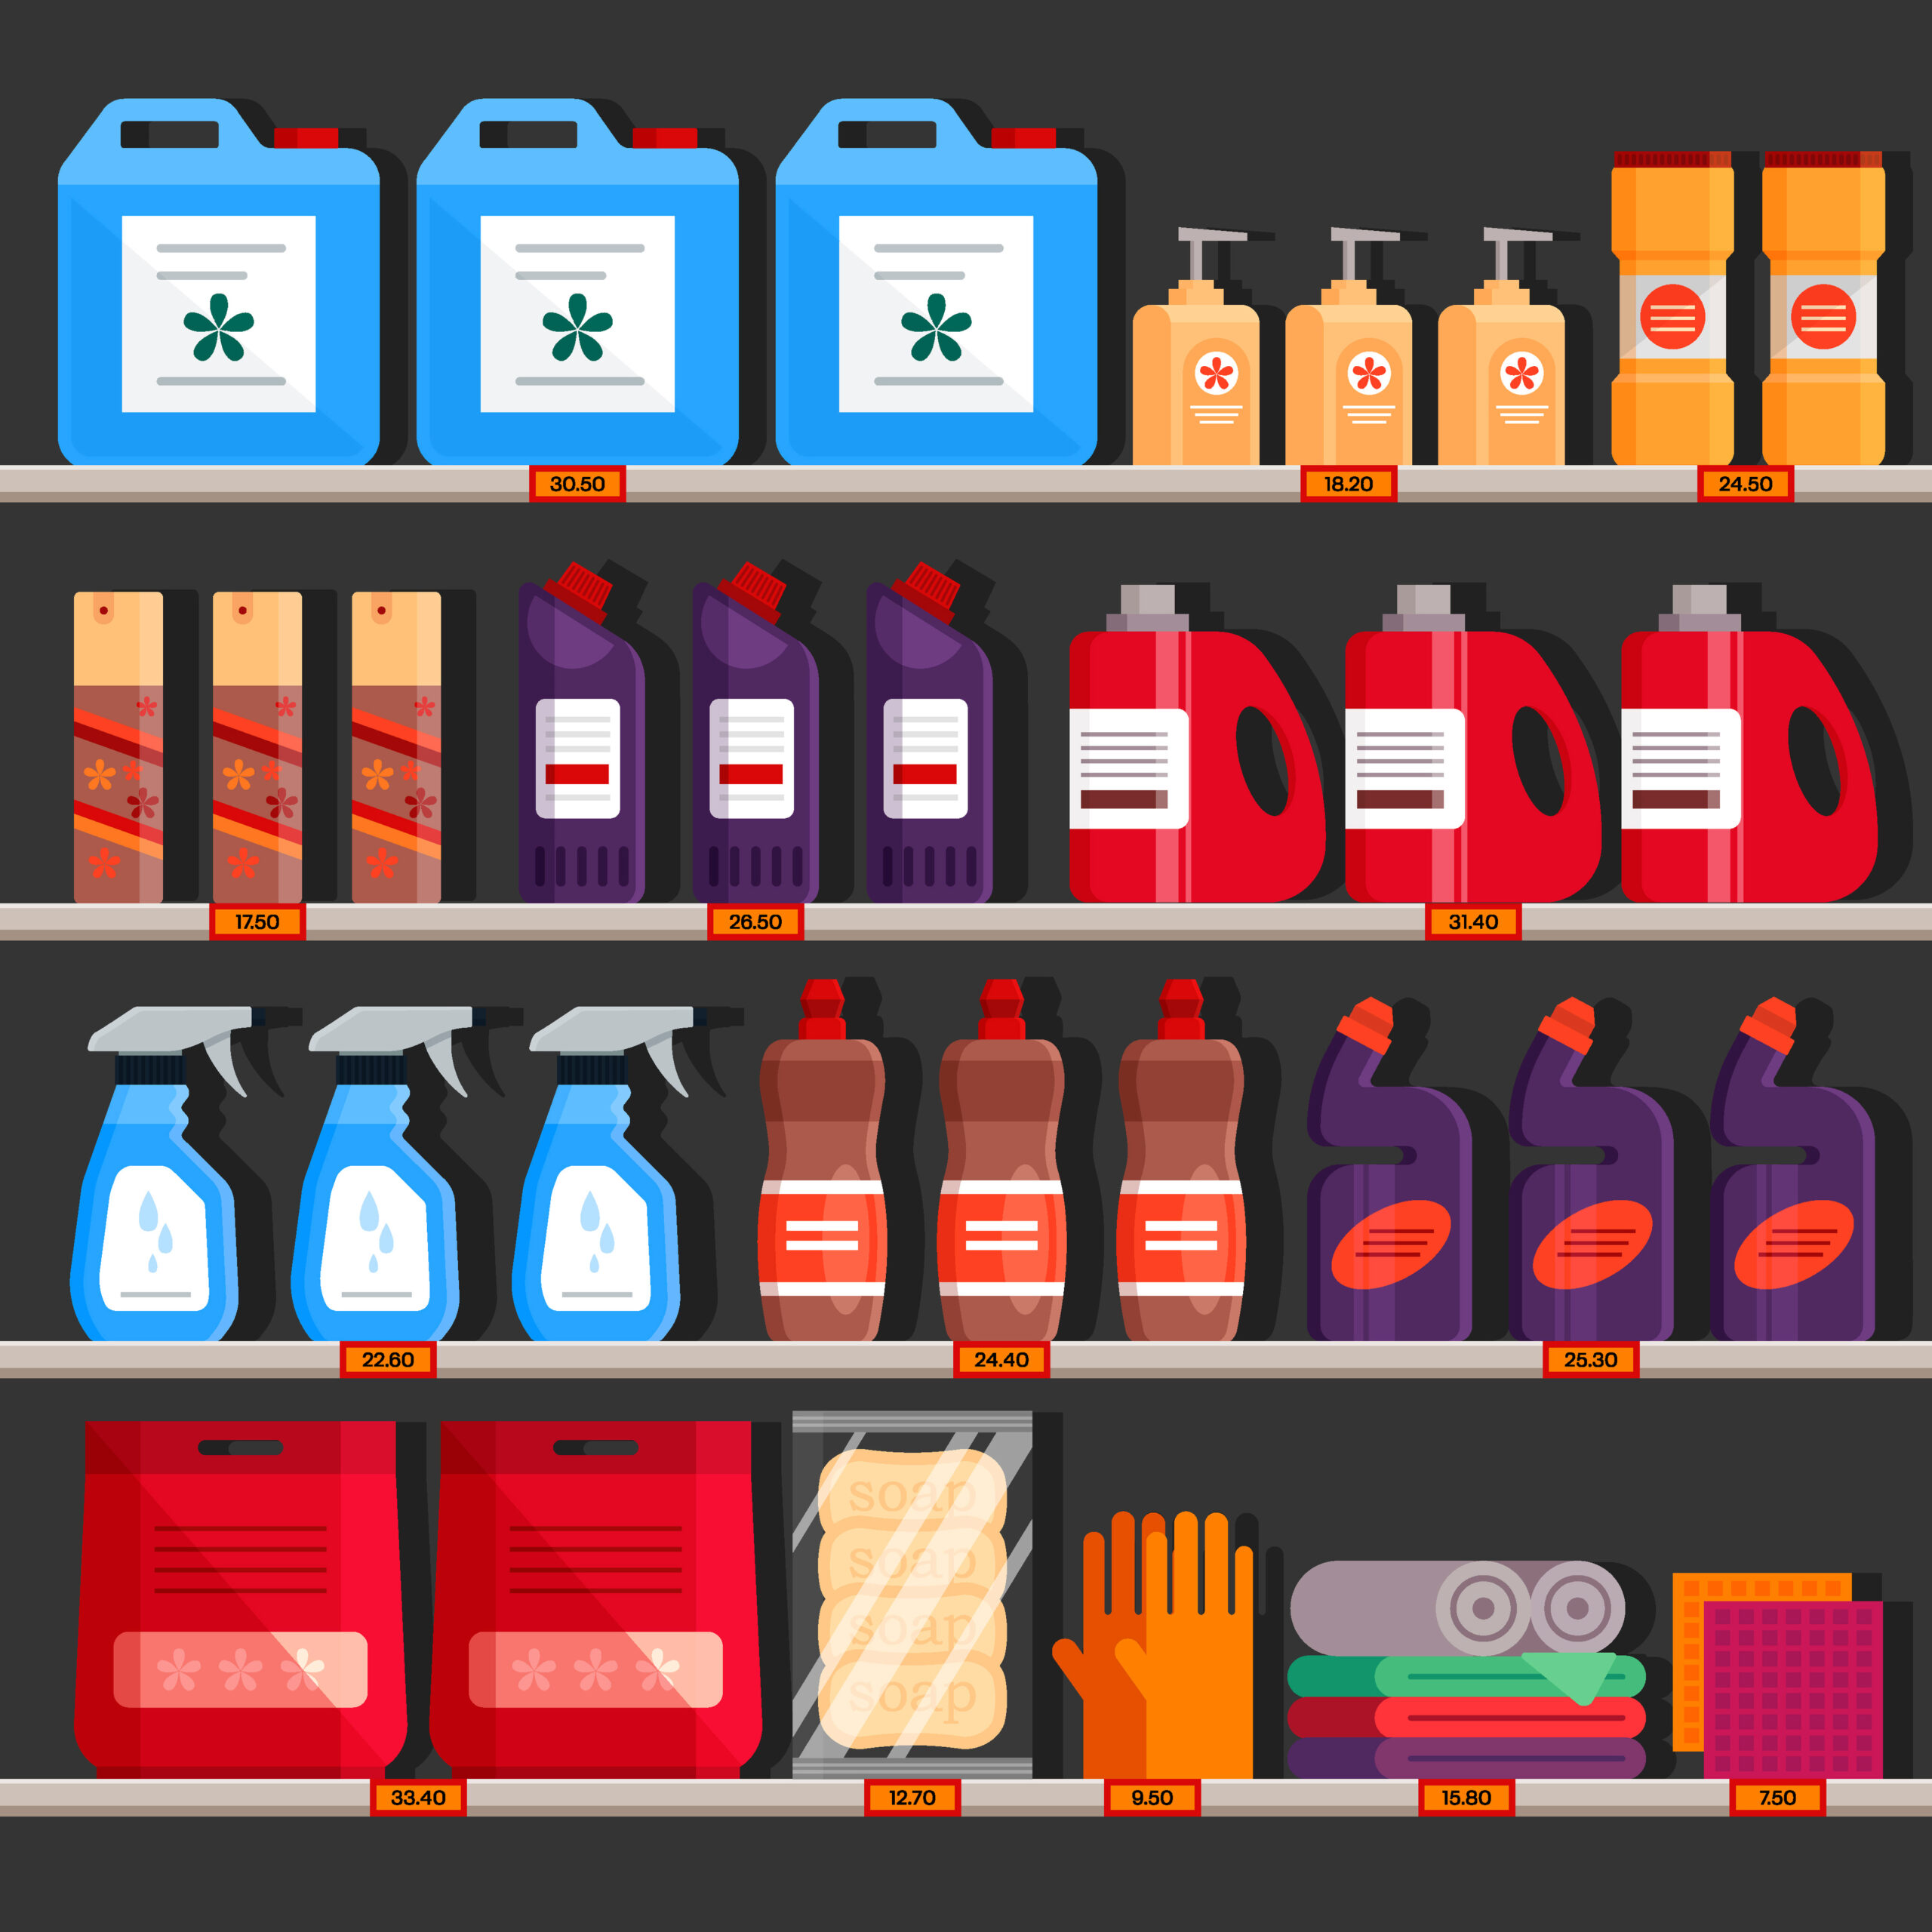 Schematic representation of various hazardous substance products on sales shelves.